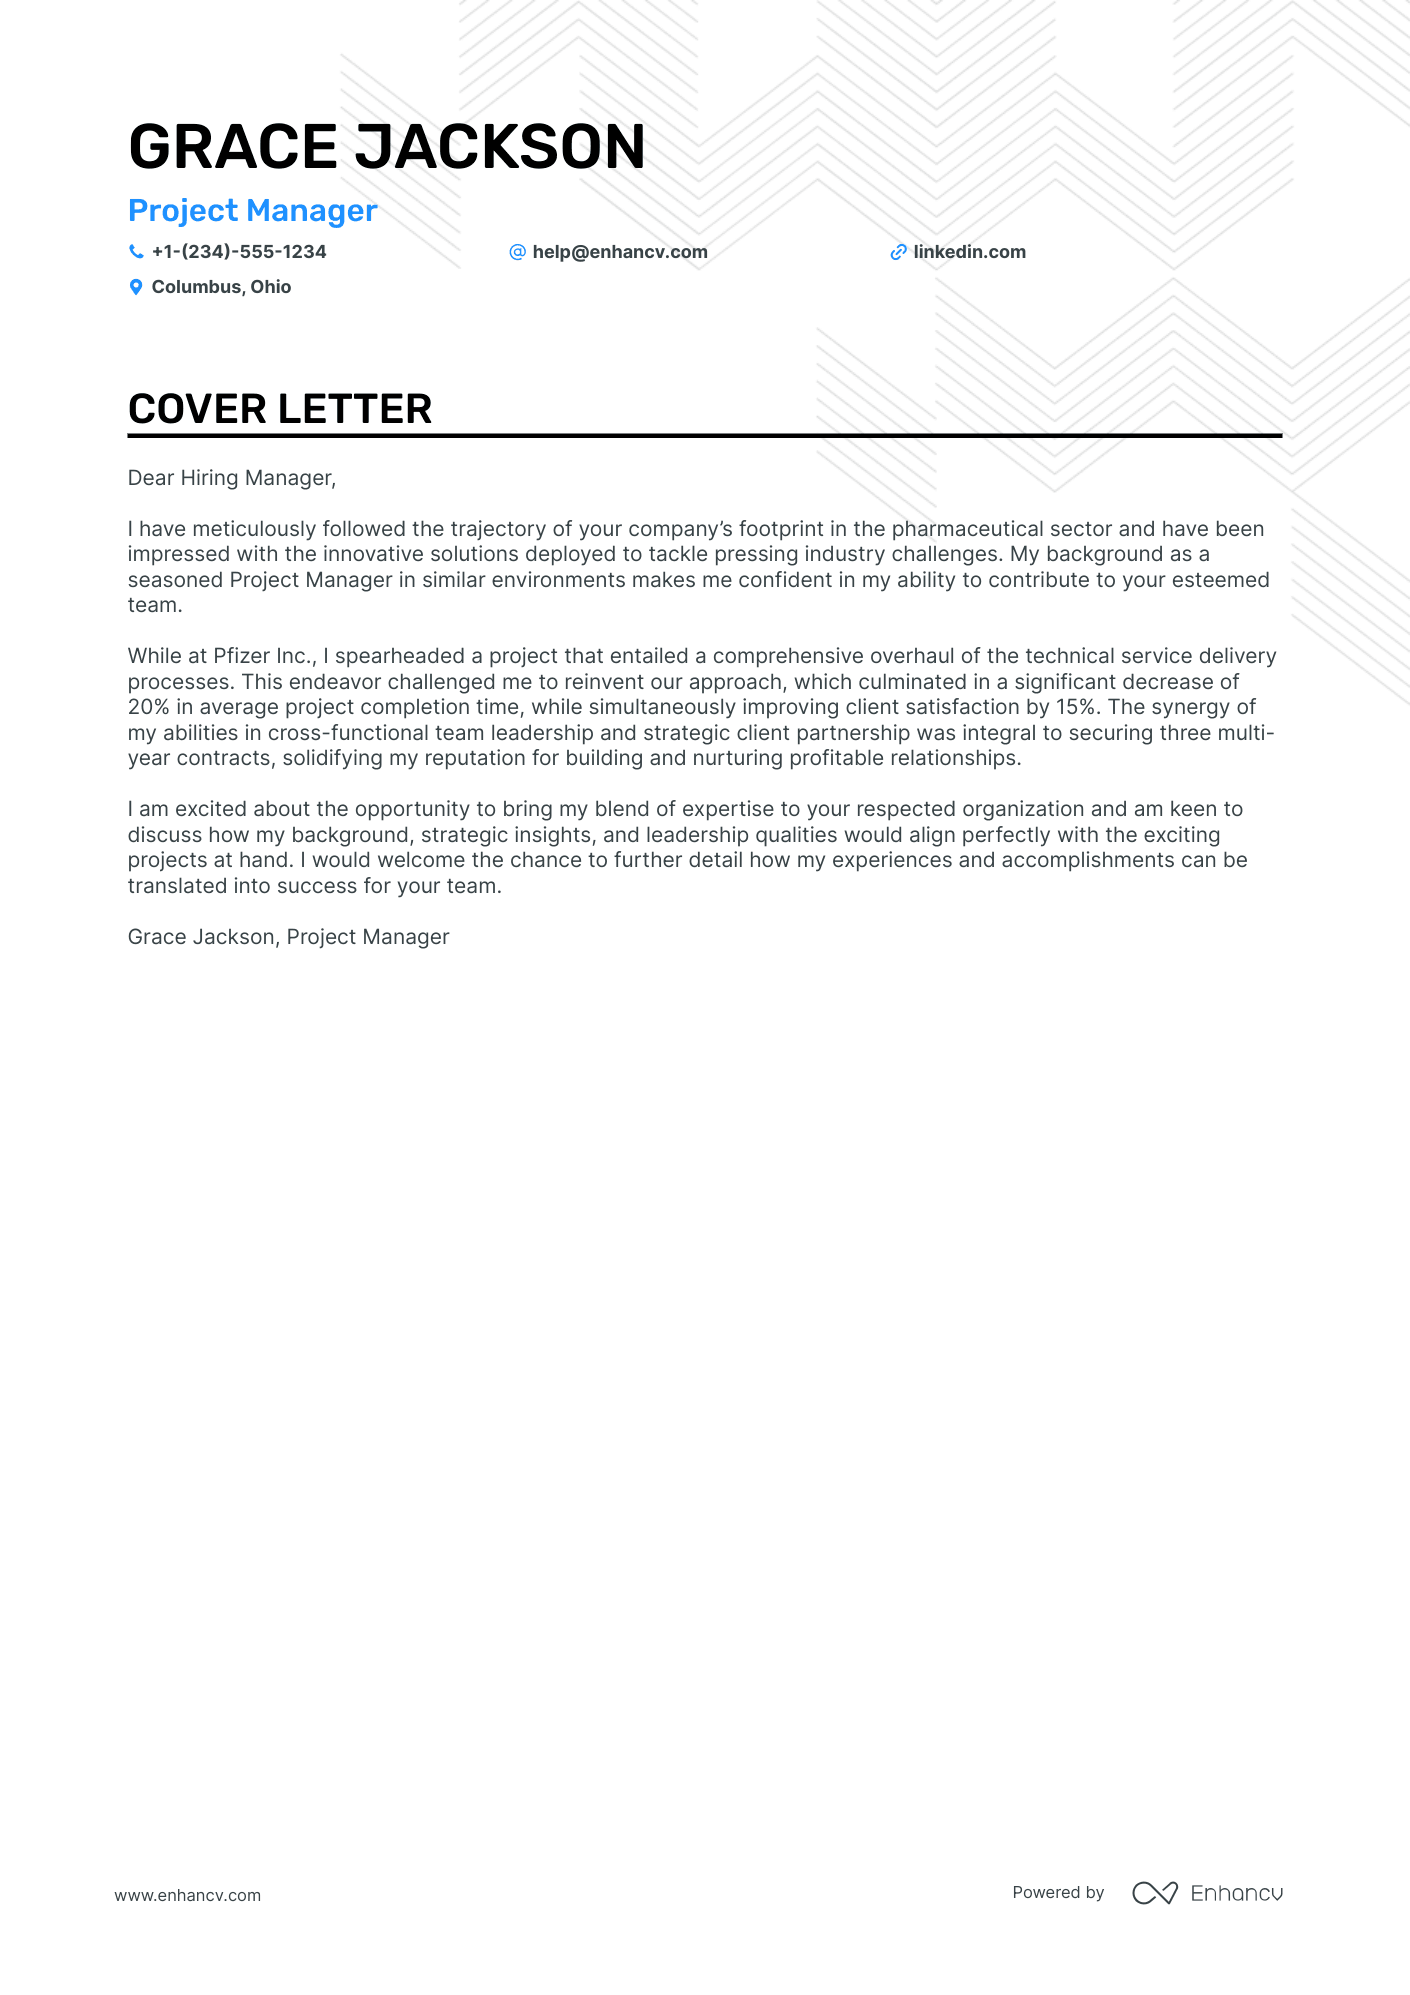 application letter for it manager